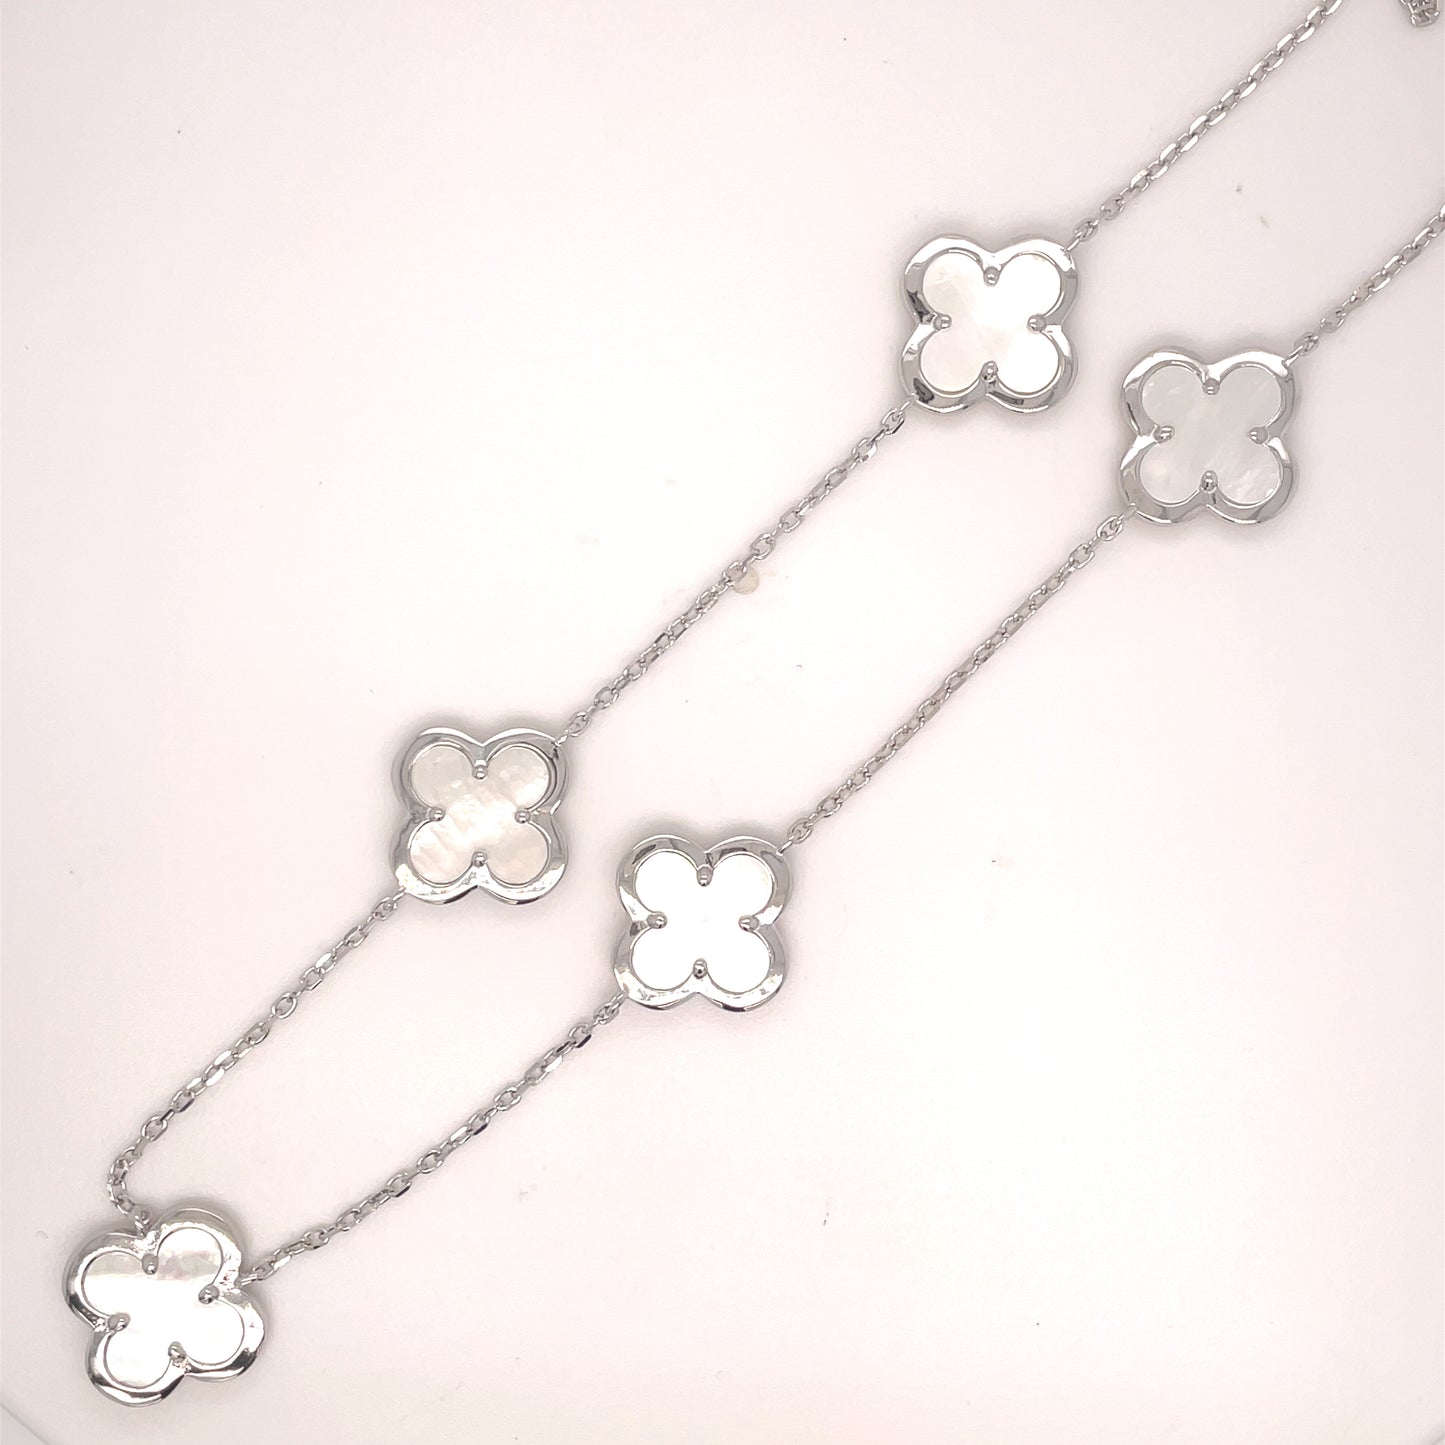 STERLING SILVER CLOVER SCATTER NECKLET WITH MOTHER OF PEARL CENTRE